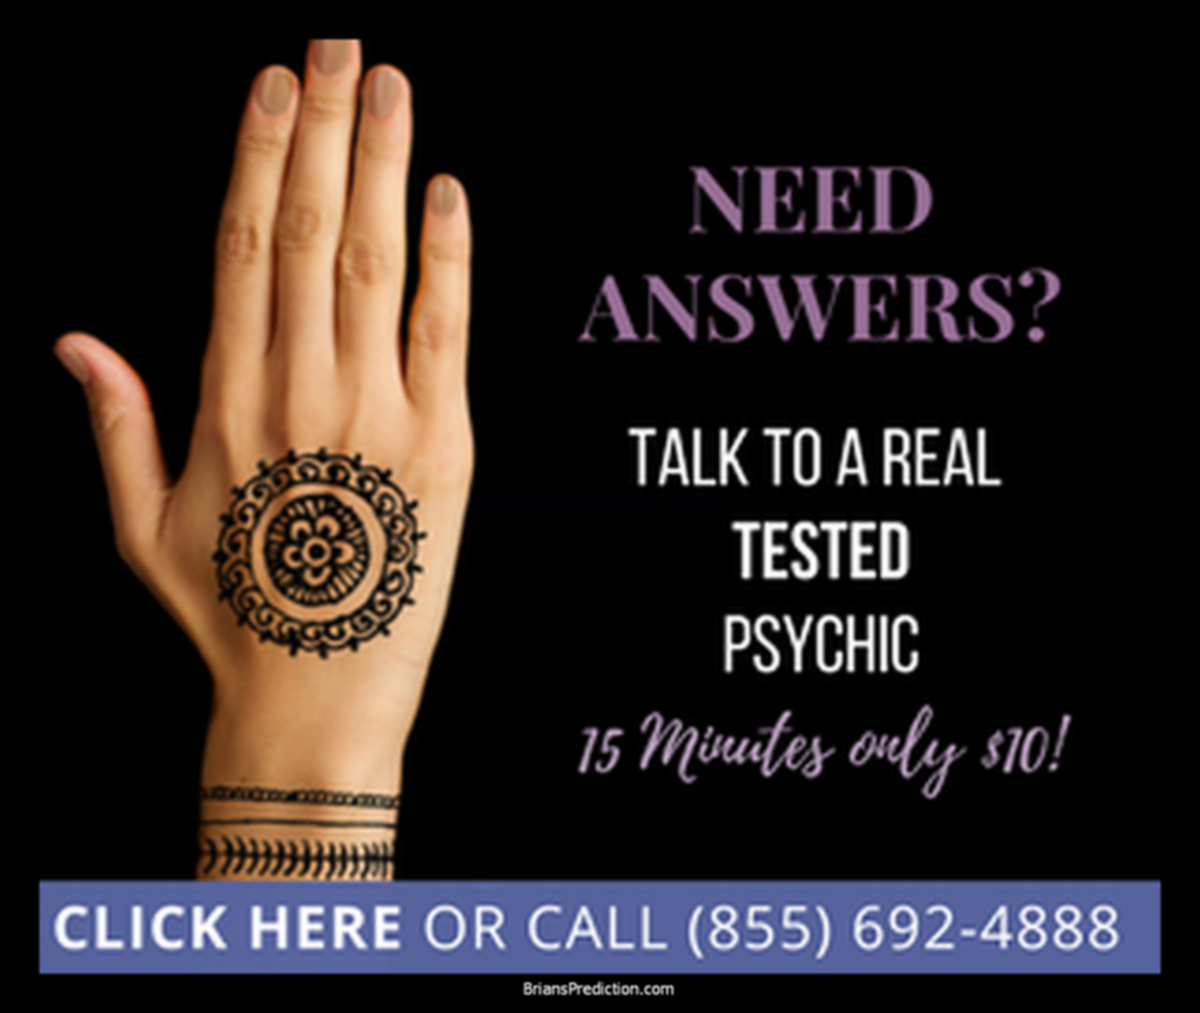 asknow 5 Psychic Predictions by Brian Ladd recommended psychics~0
asknow 5 Psychic Predictions by Brian Ladd recommended psychics~0
